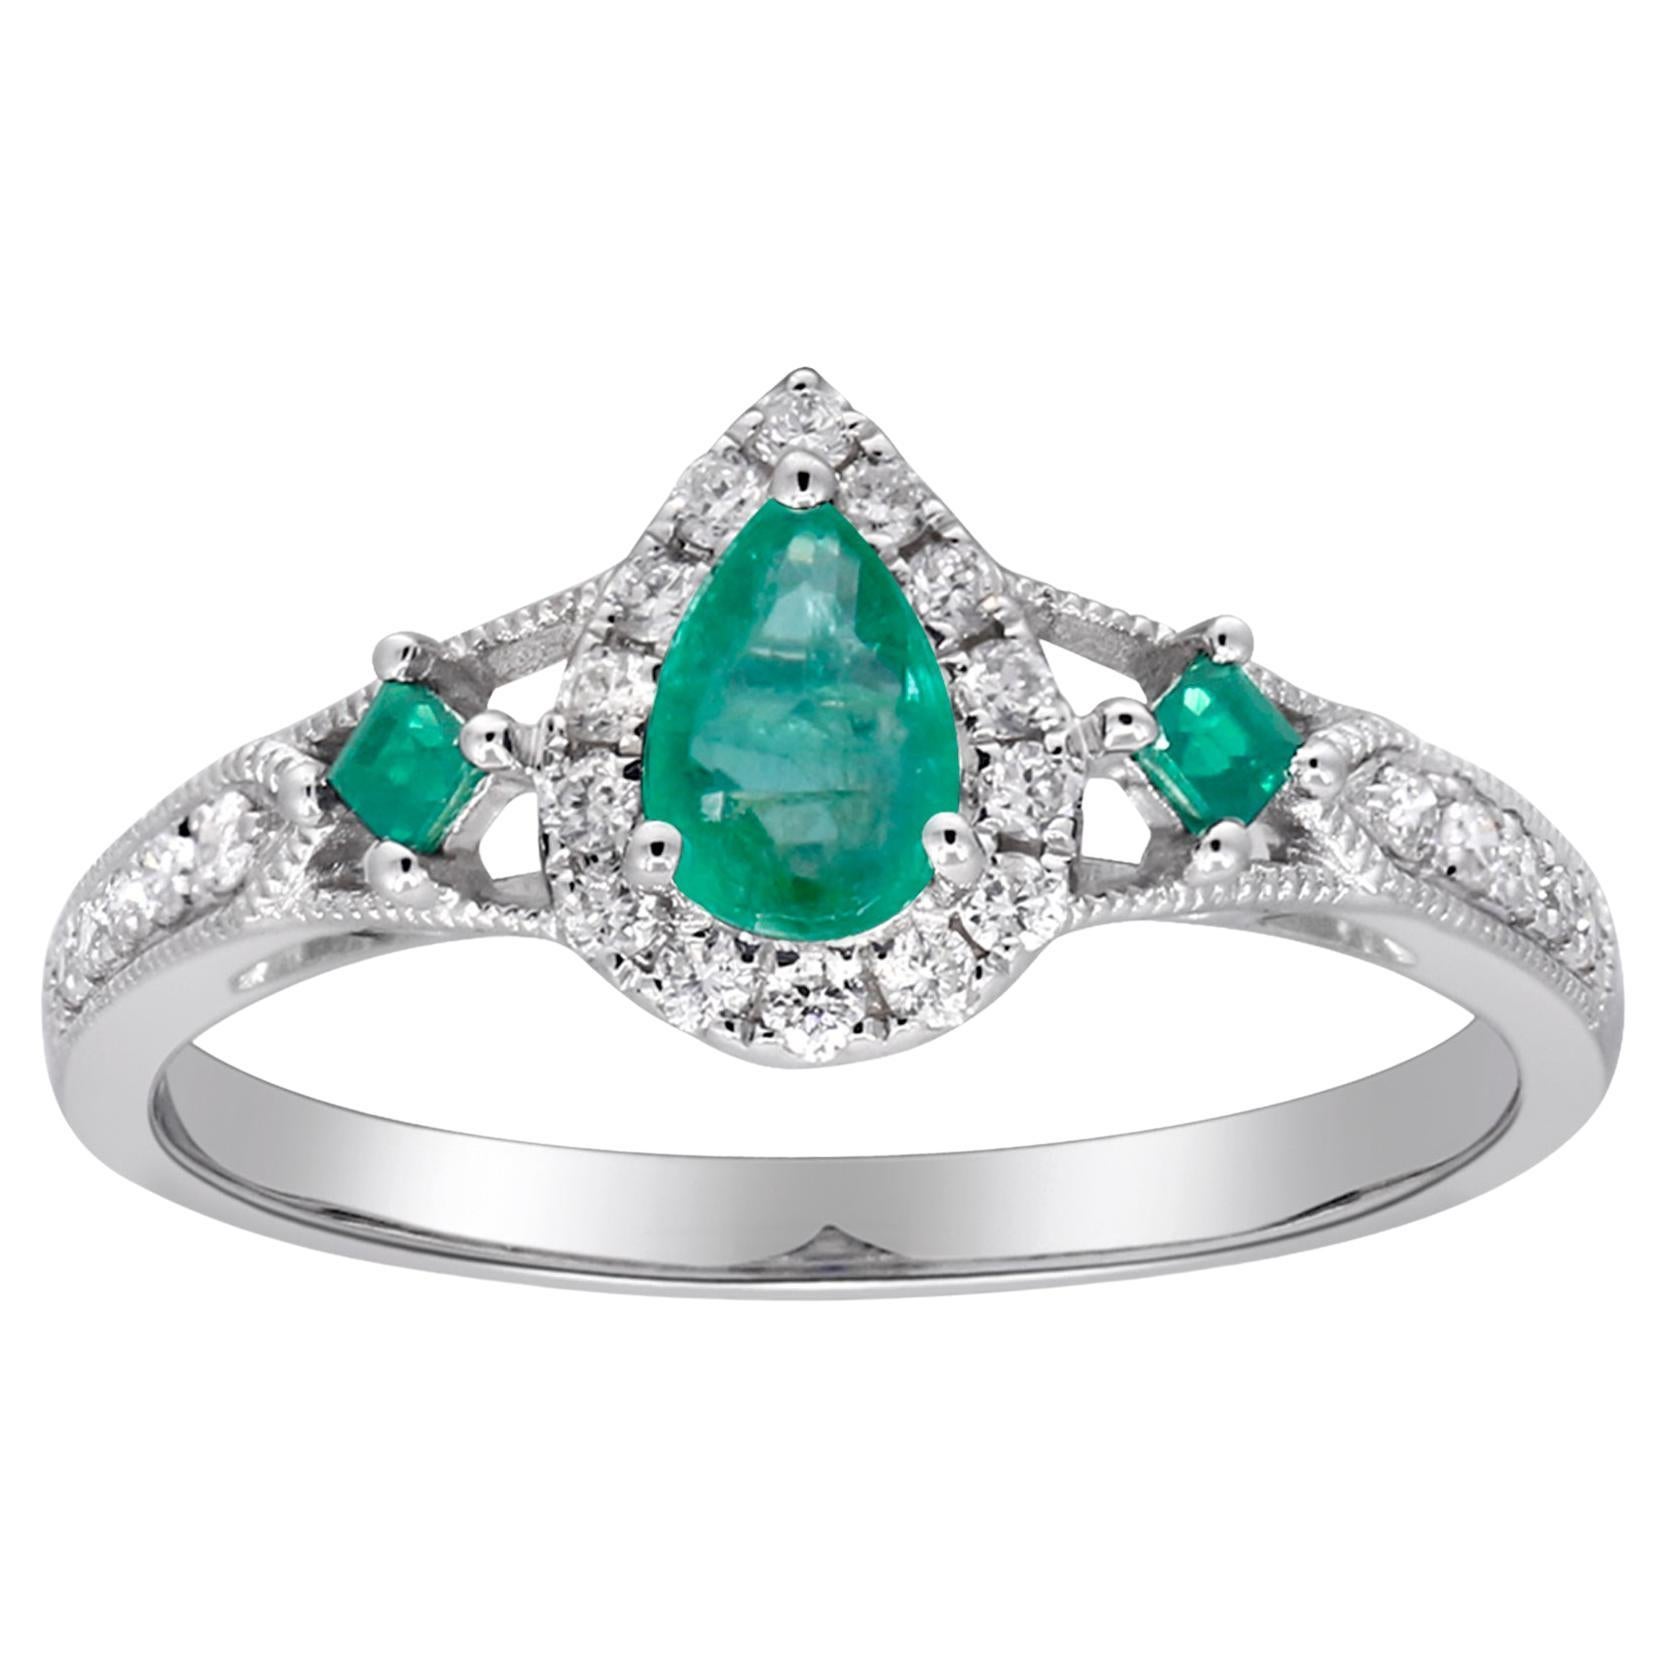 0.32 Carat Pear Cut and 0.10 Round Cut Emerald Diamond Accents 14KW Gold Ring